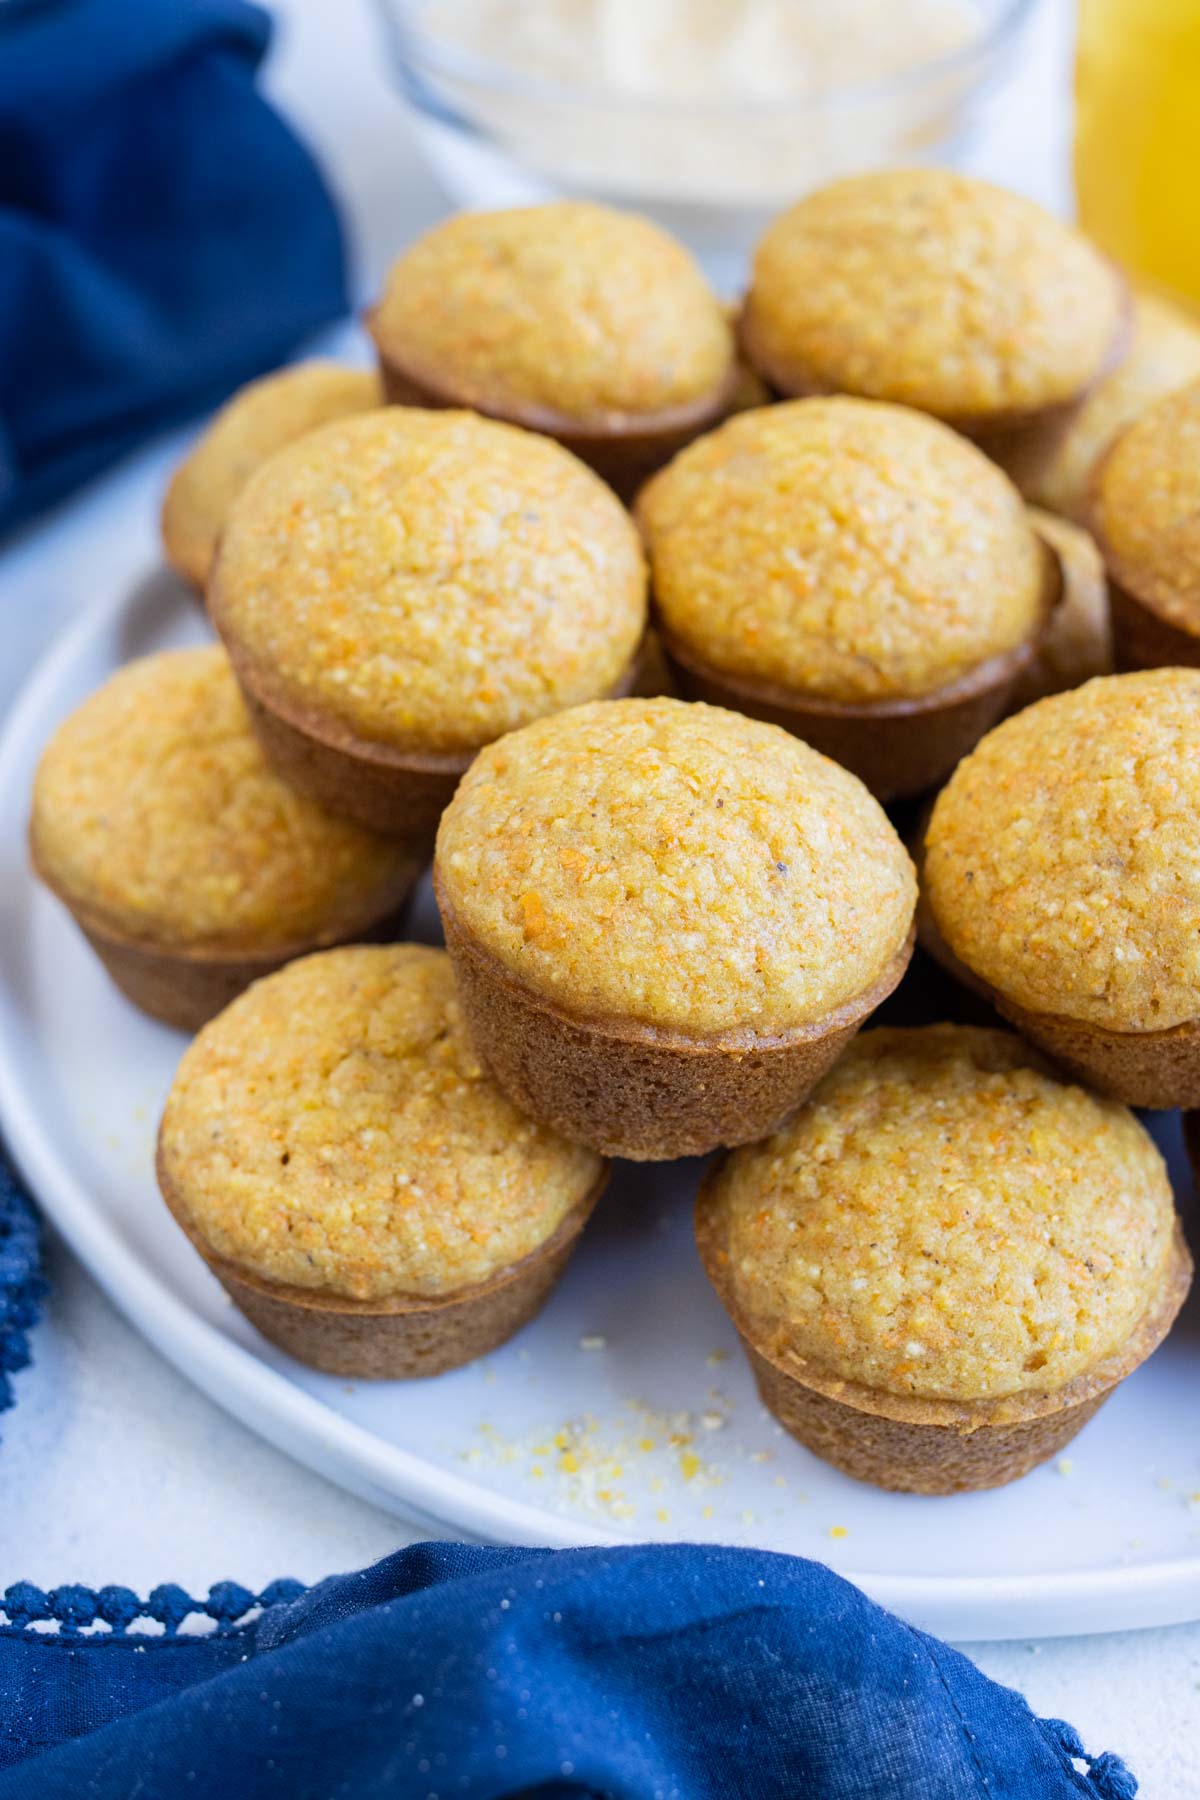 Golden and sweet cornbread baked into mini muffins.